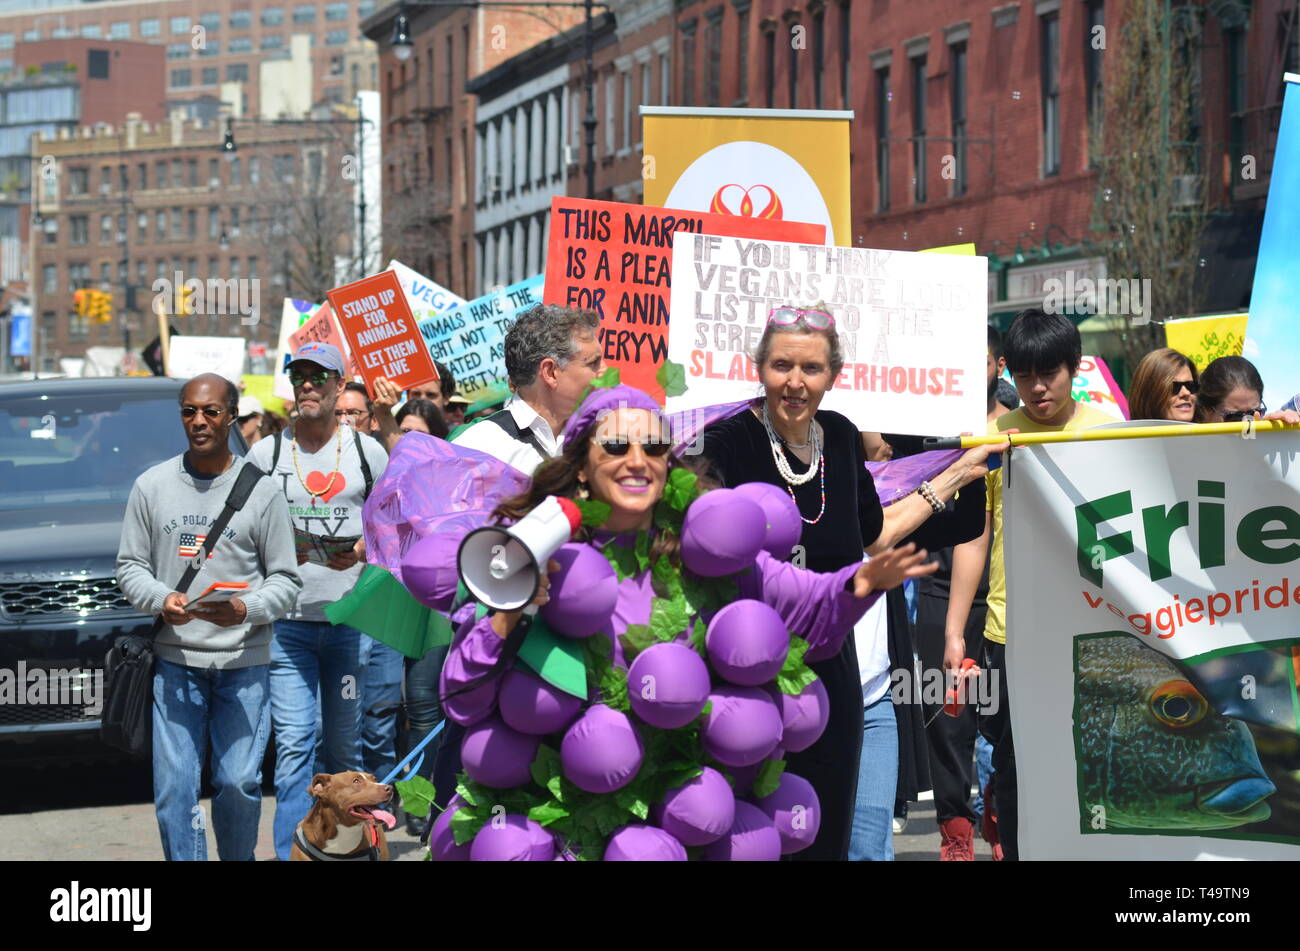 A woman seen with a megaphone and banners during the Annual Veggie Pride Parade. The parade celebrates veganism and exercises the First Amendment rights of those who oppose violence against other animals. Stock Photo